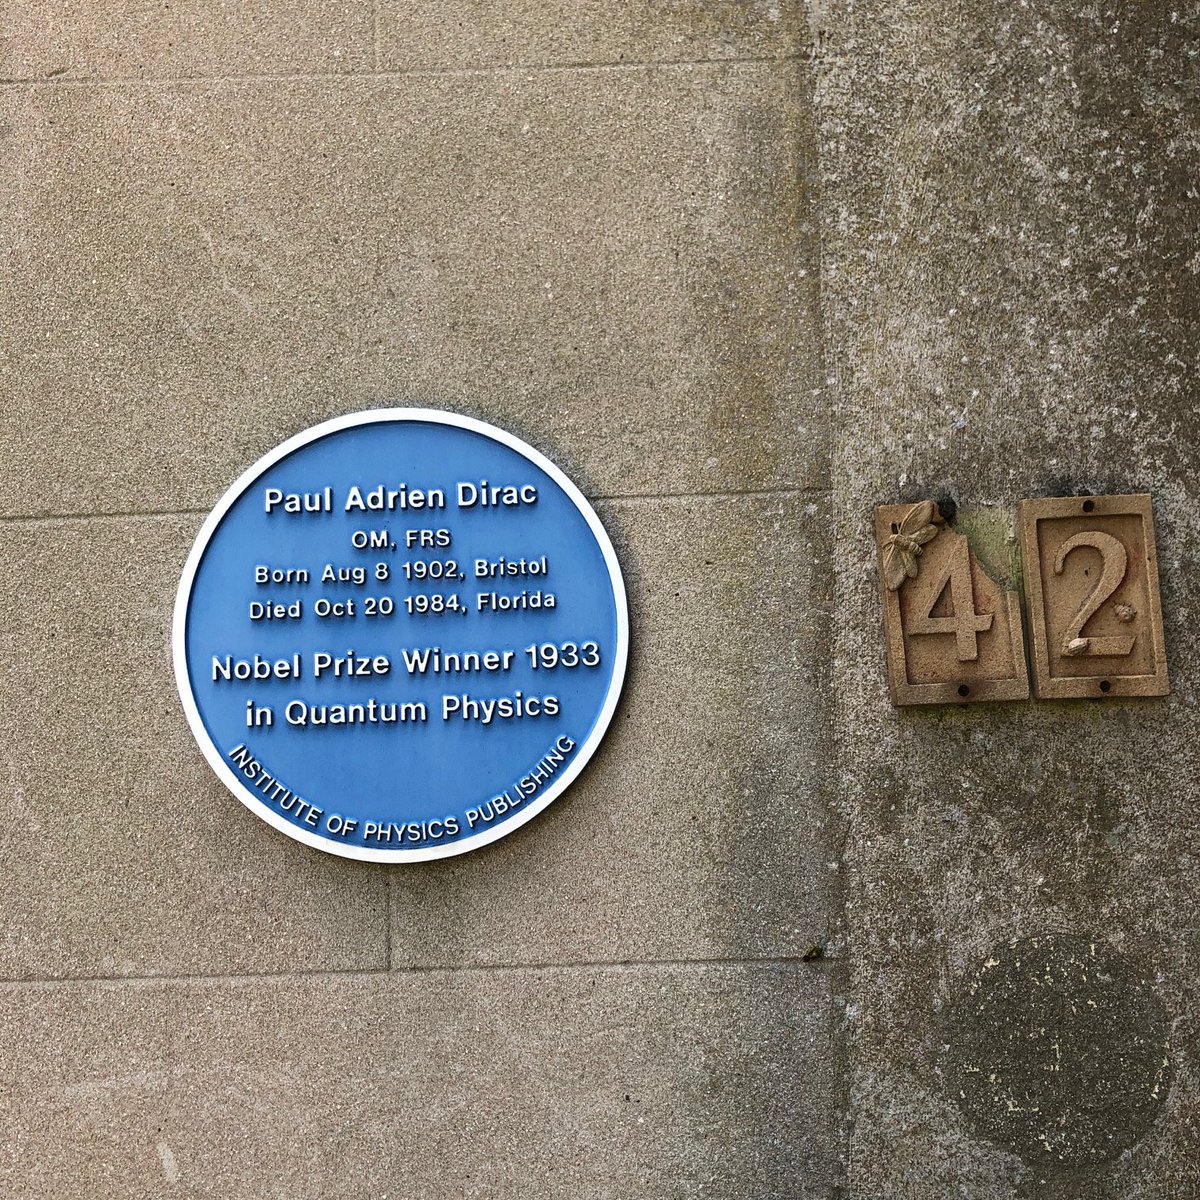 Indeed it was, and this was it, and yes, as it turns out, they are. It’s 42 Cotham Road, a house I walk past most days but only recently had spotted the plaque. Paul Dirac, in case you’re wondering, is only the most important British physicist since actual Issac Newton. Who knew?